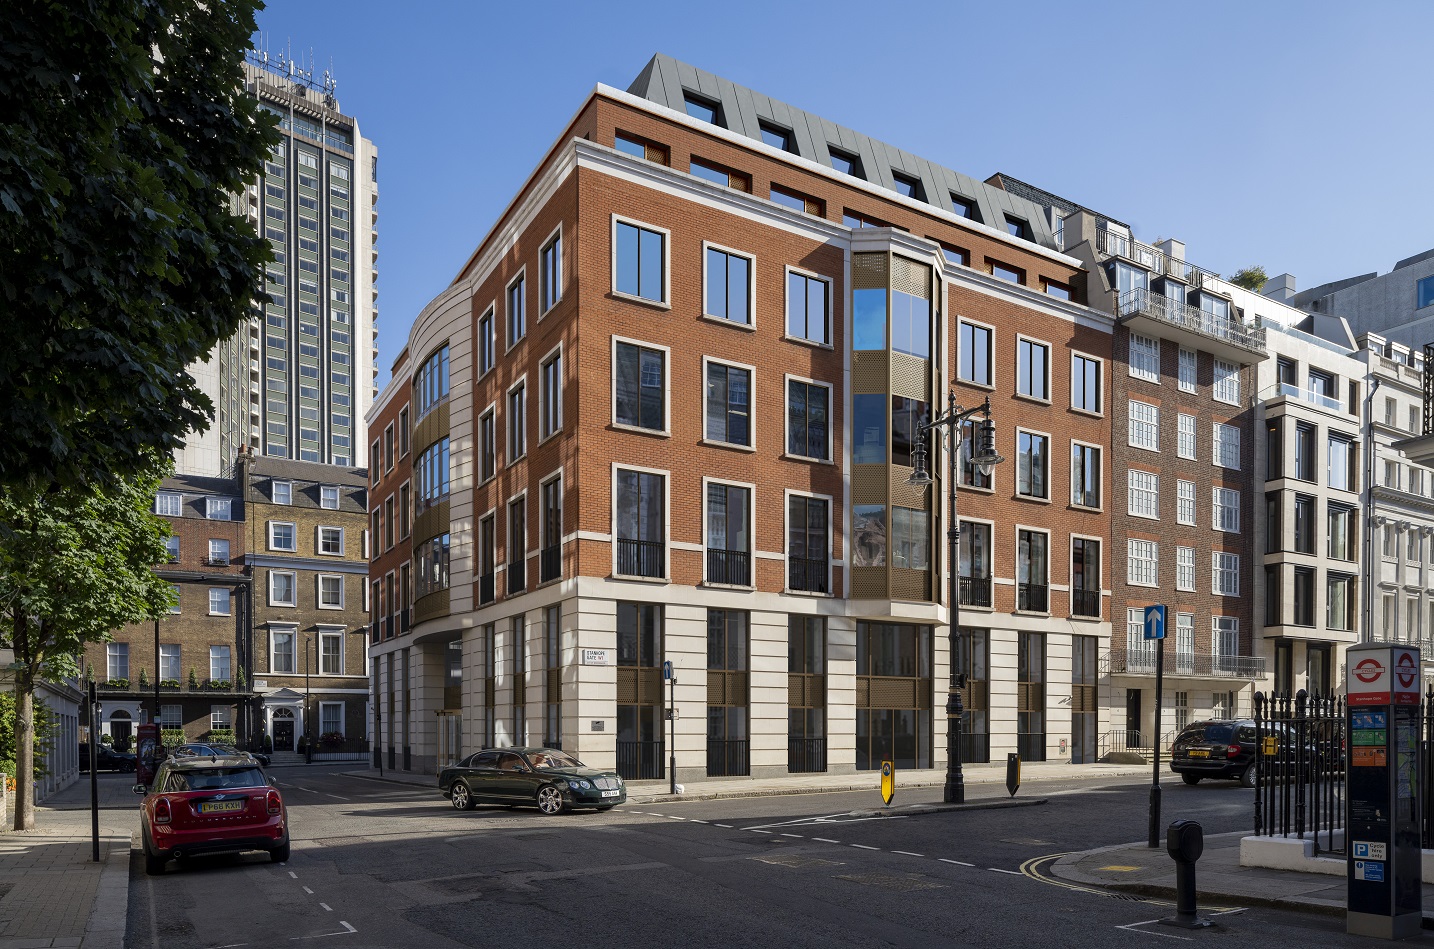 Lothbury Gains Planning Permission For Extension At One Stanhope Gate